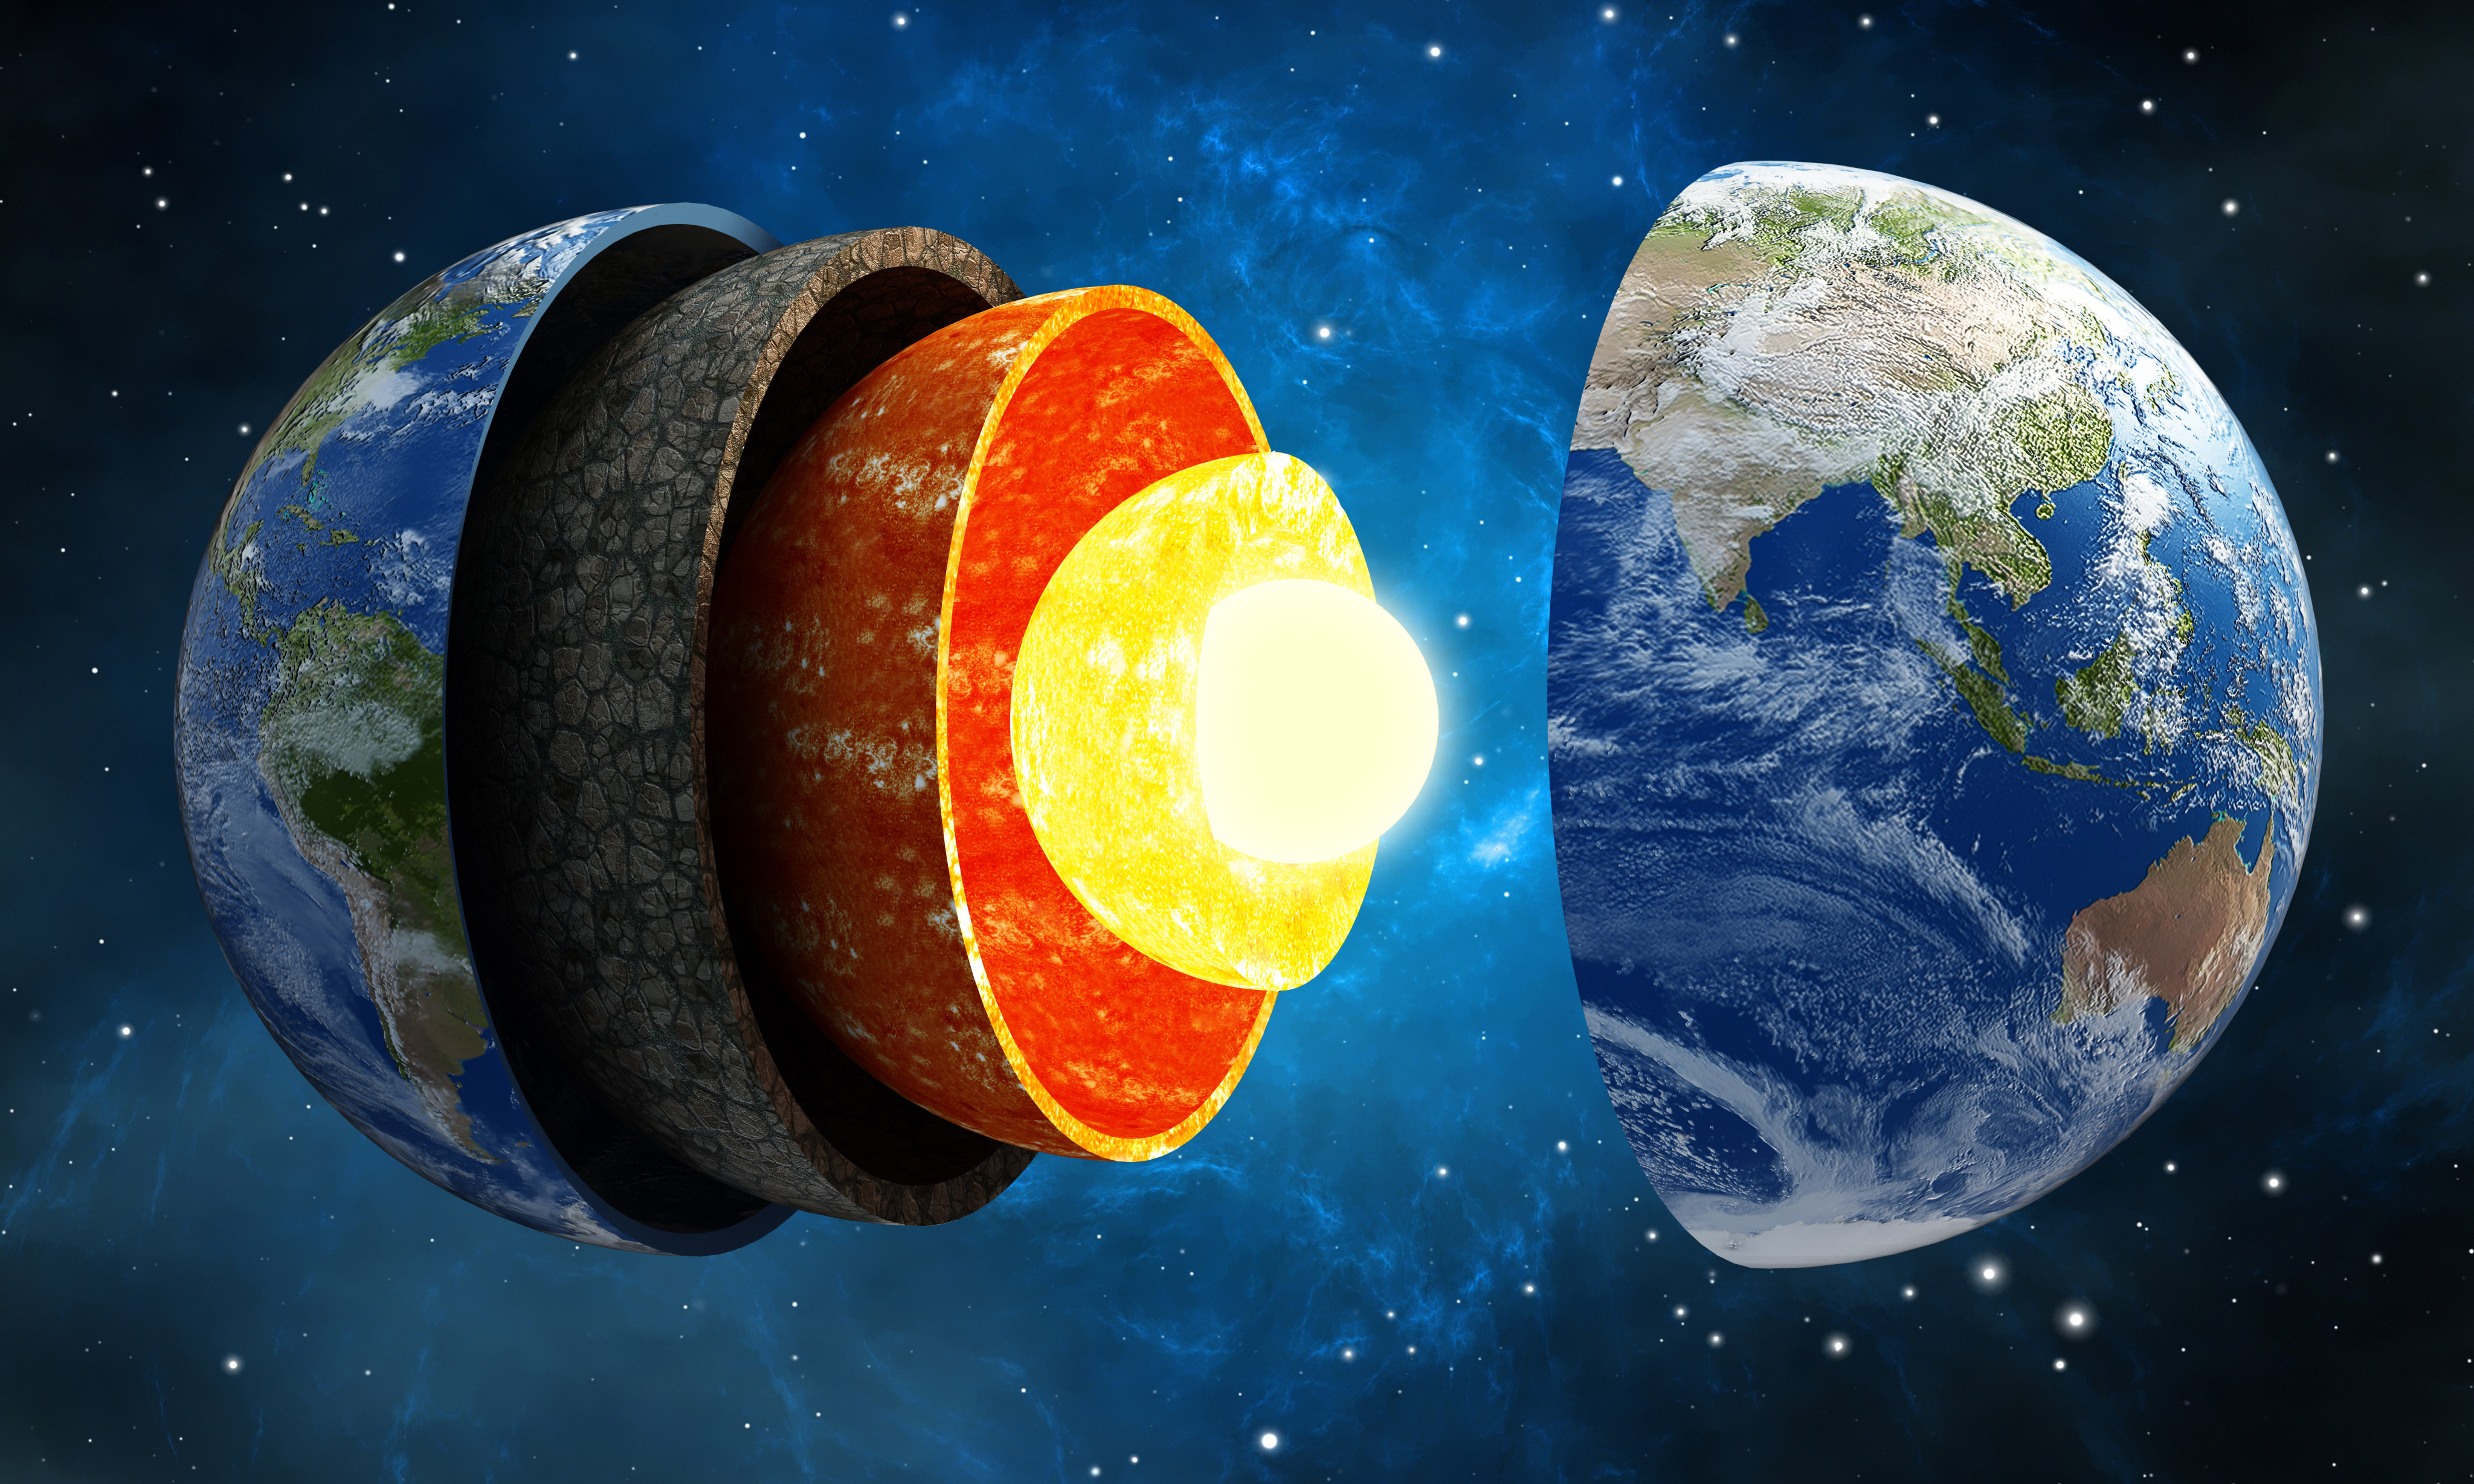 Earth's Inner Core is Rotating, Study Says, Geophysics, Geoscience